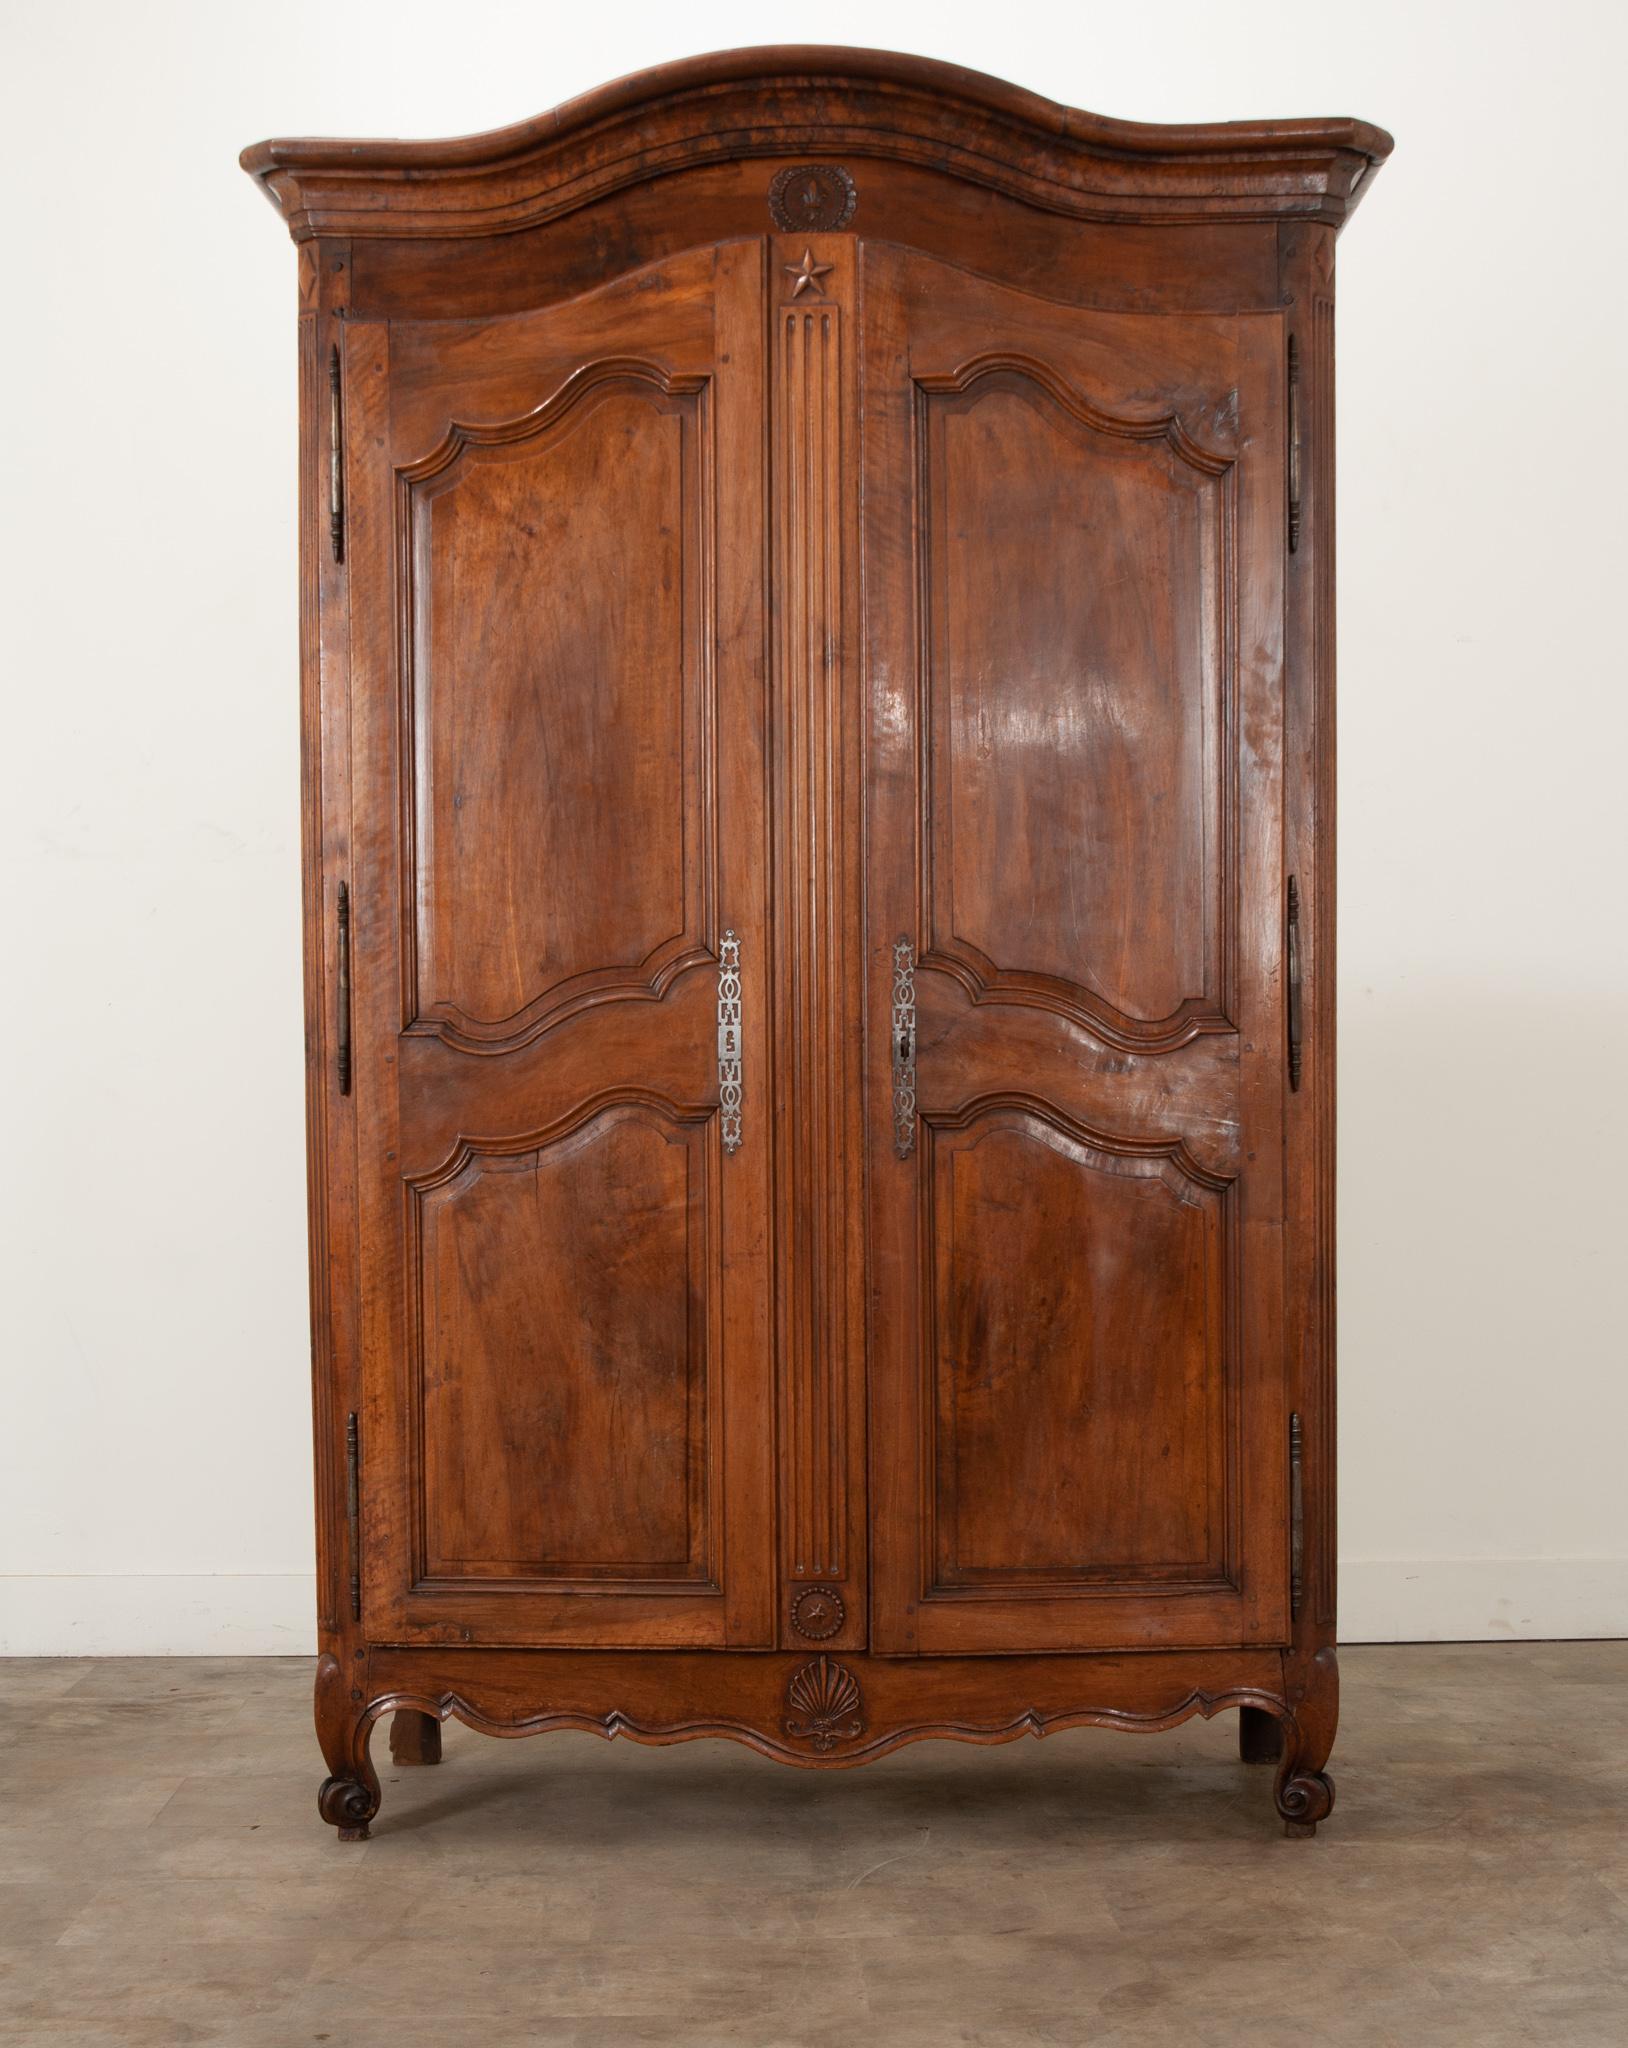 A French carved, solid walnut armoire built in the Louis XV period. A Chapeau de Gendarme cornice tops the body of the armoire. Two solid walnut doors have shapely carved panels creating a gorgeous façade with style-matching, recessed panels. The